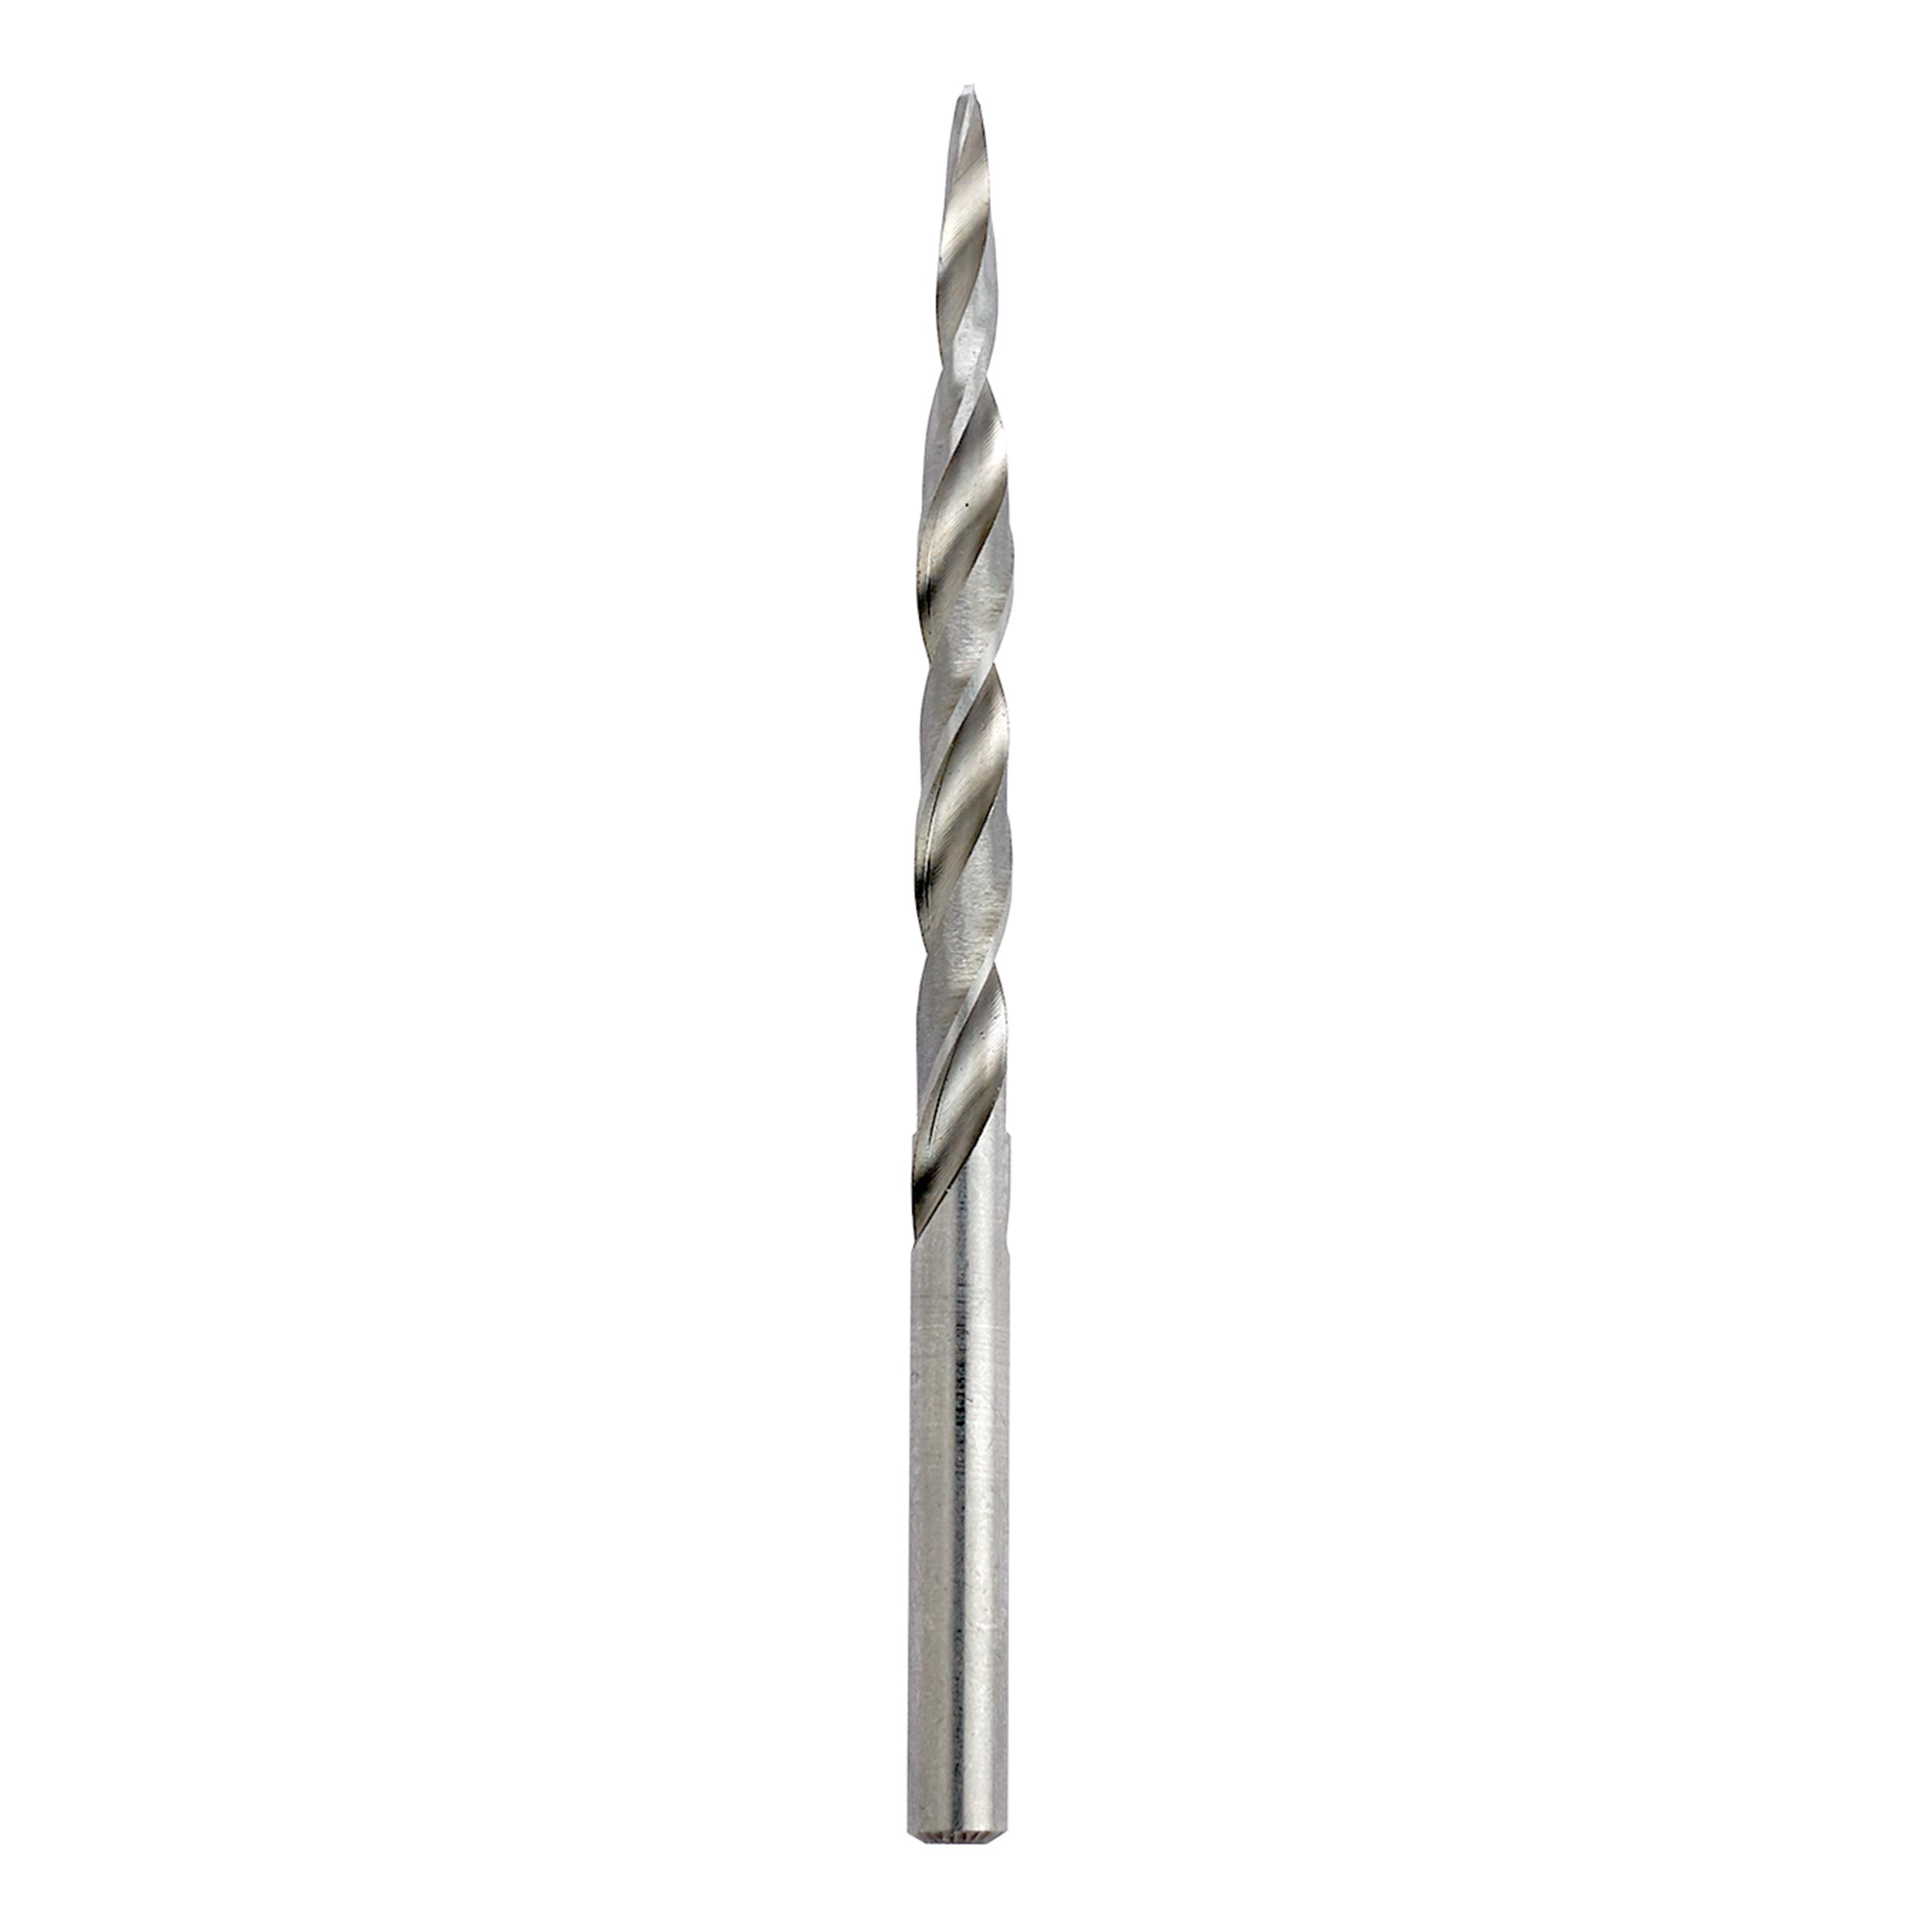 Replacement 13/64" Taper Drill Bit For #10 Screws